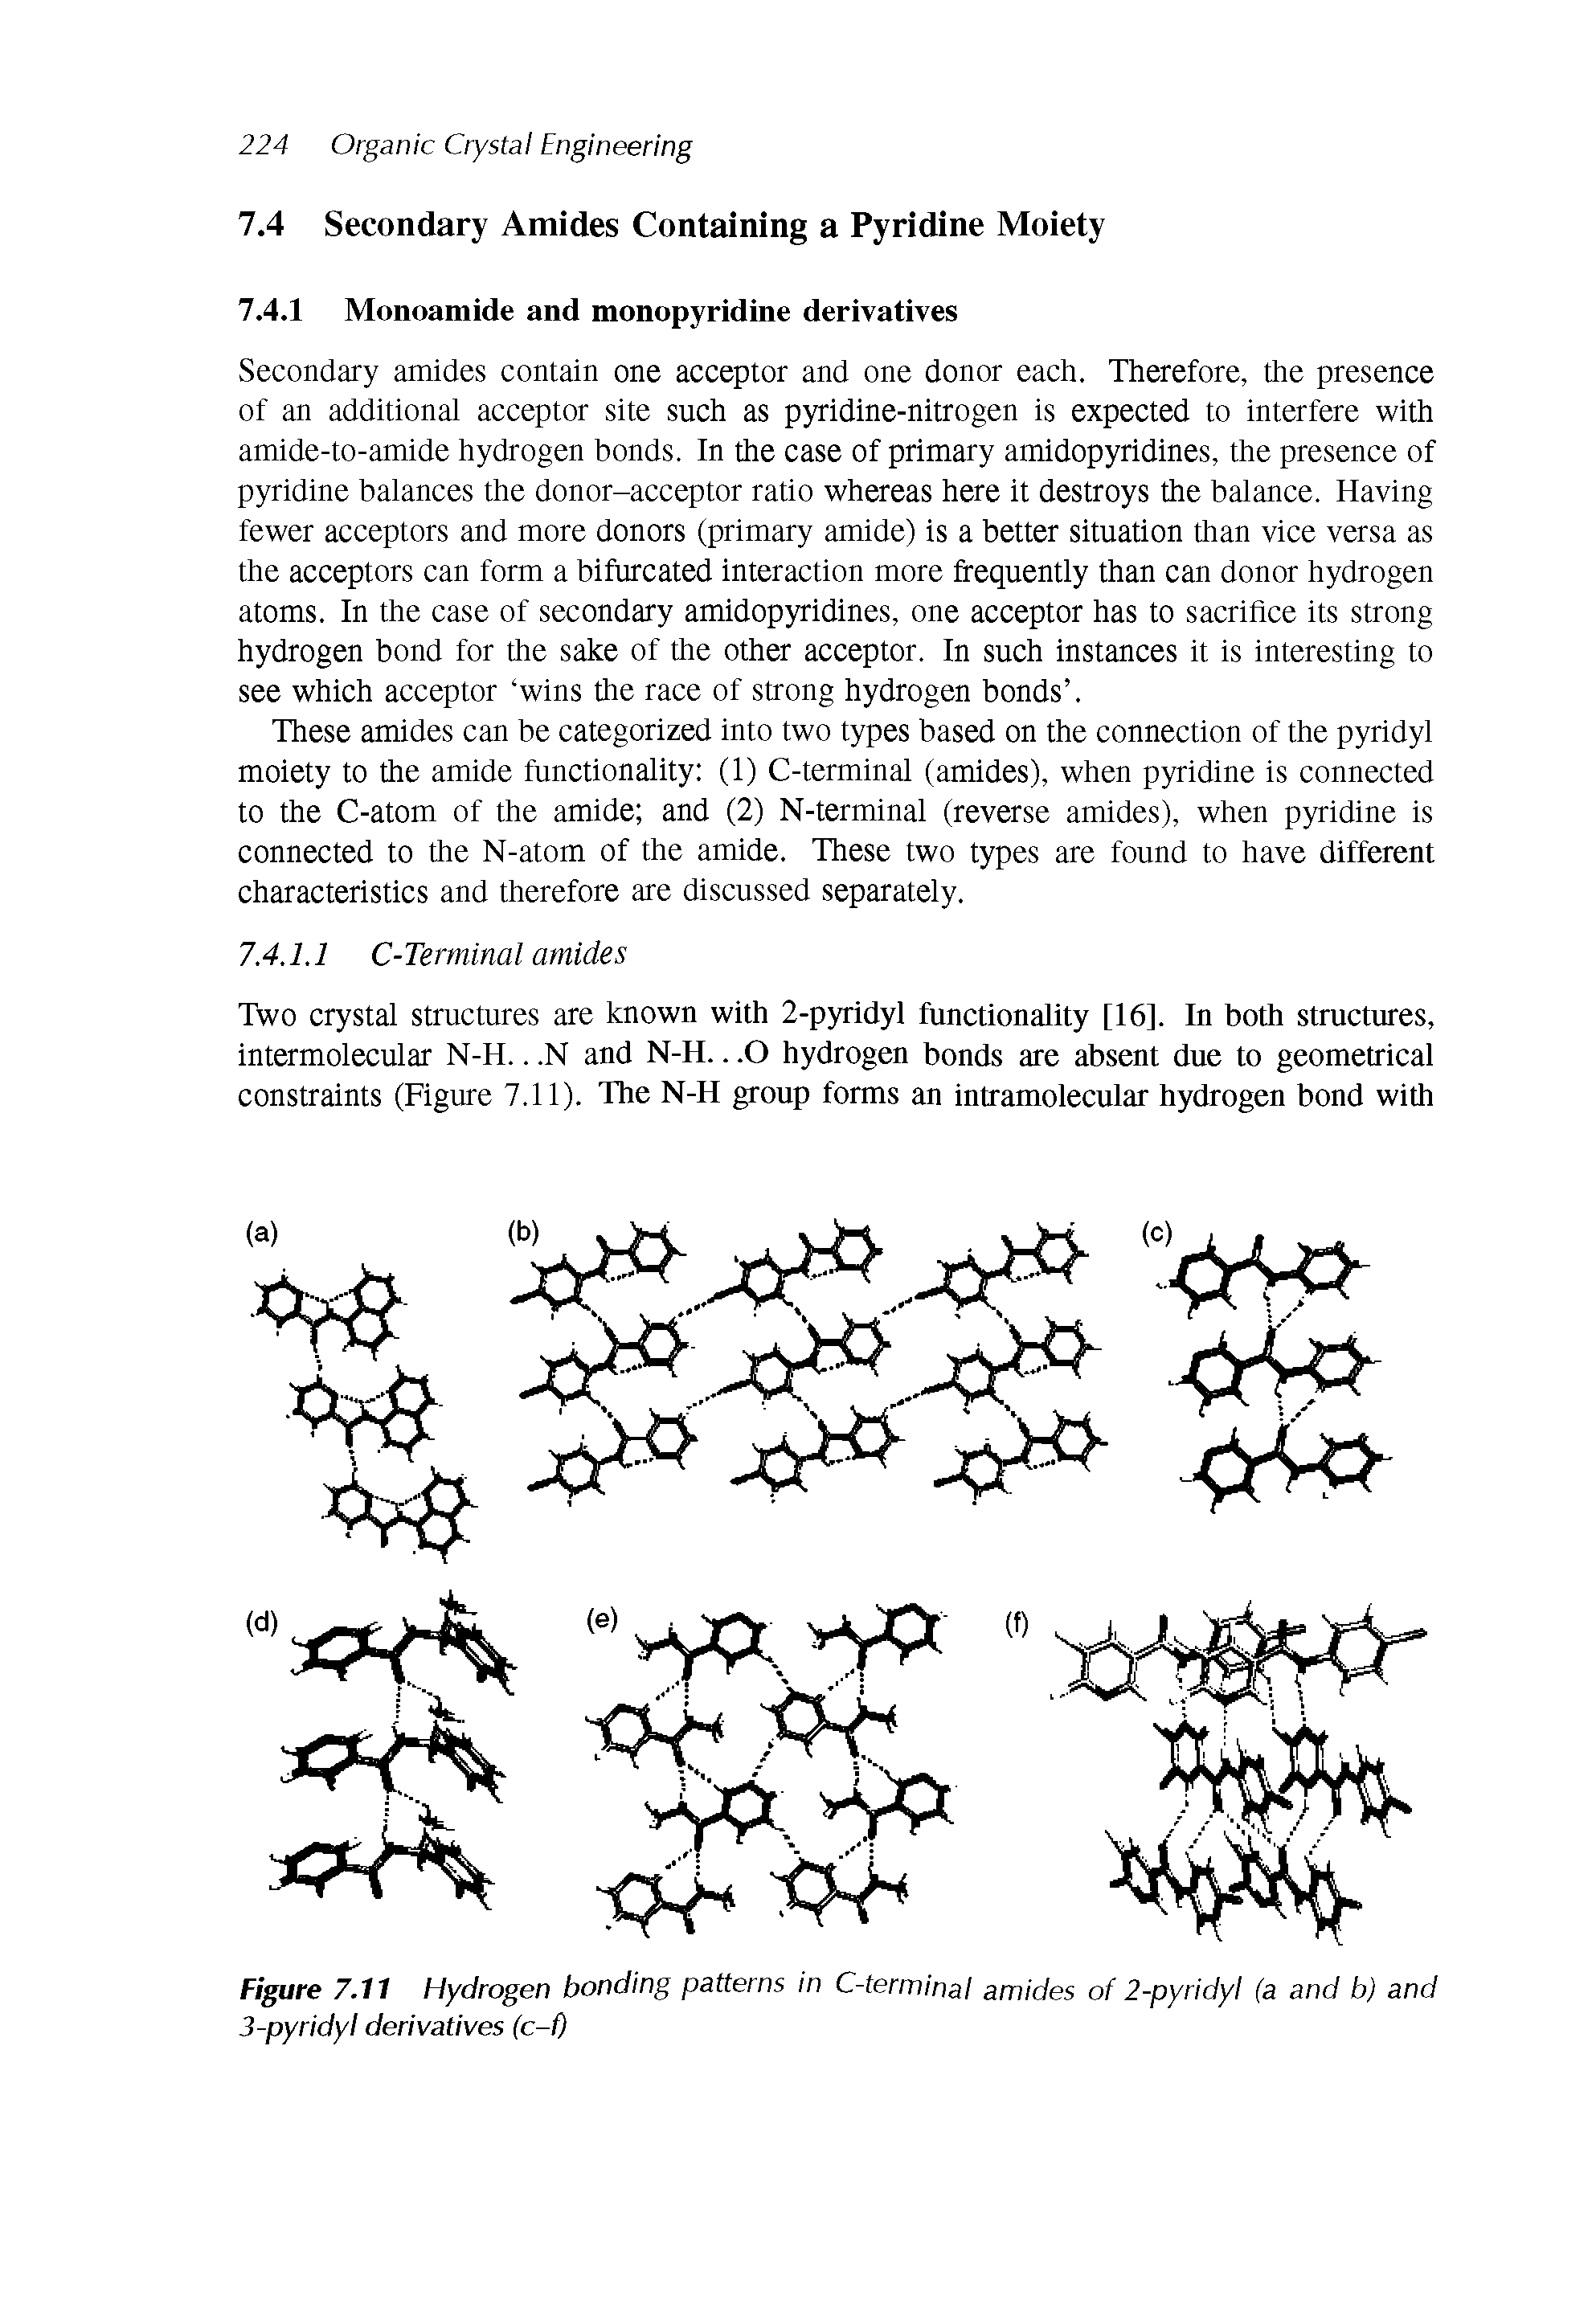 Figure 7.11 Hydrogen bonding patterns in C-terminal amides of 2-pyridyl (a and b) and 3-pyridyl derivatives (c-f)...